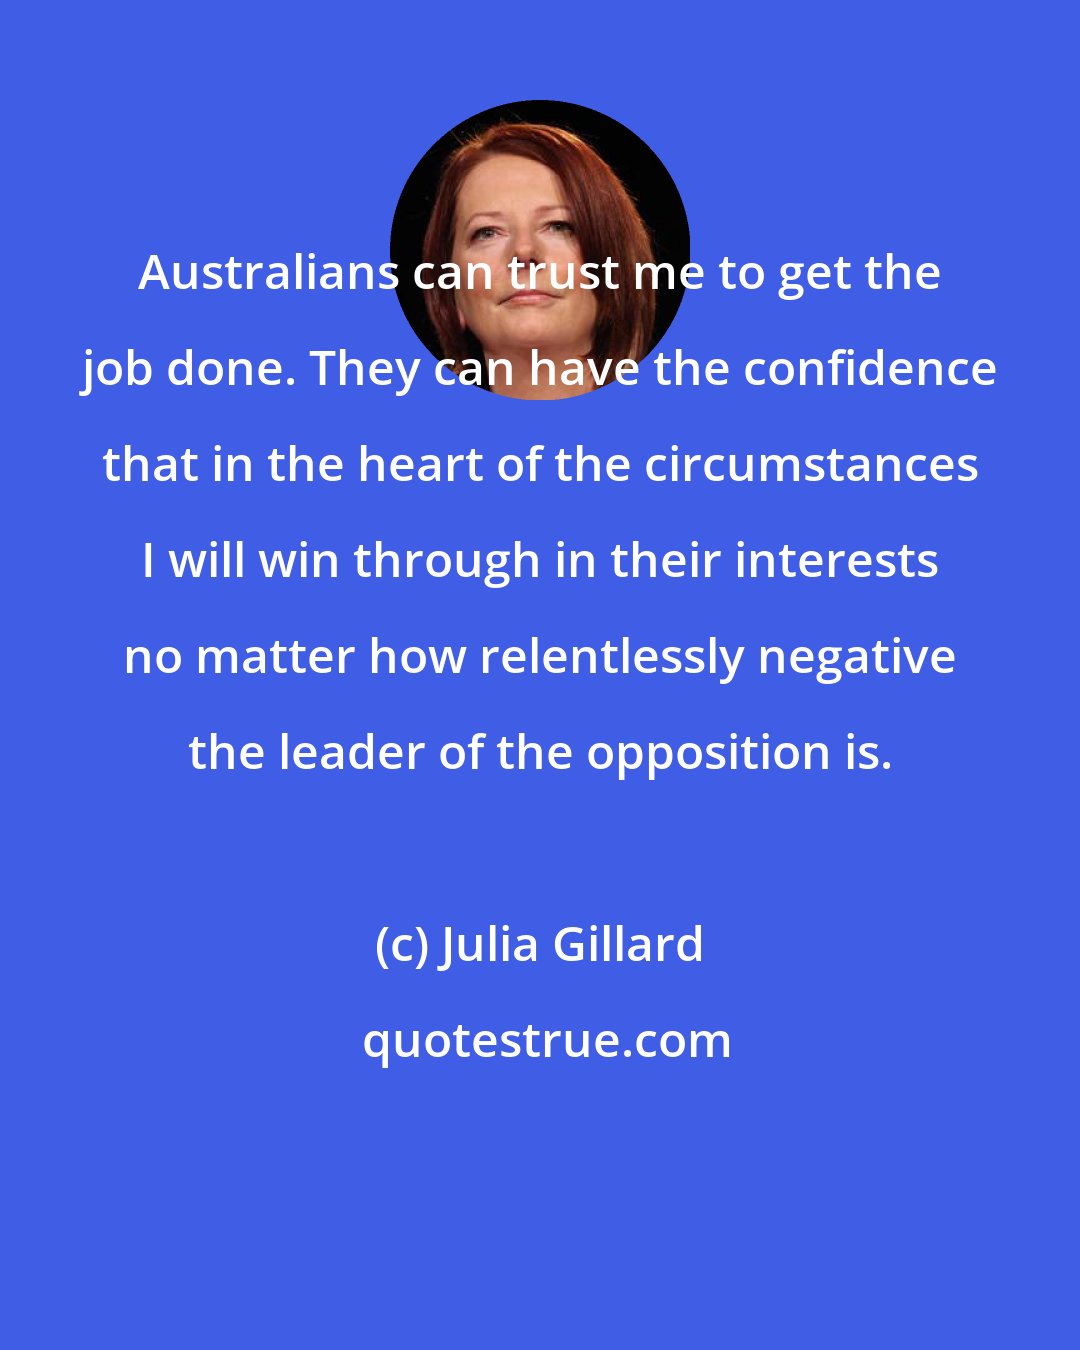 Julia Gillard: Australians can trust me to get the job done. They can have the confidence that in the heart of the circumstances I will win through in their interests no matter how relentlessly negative the leader of the opposition is.